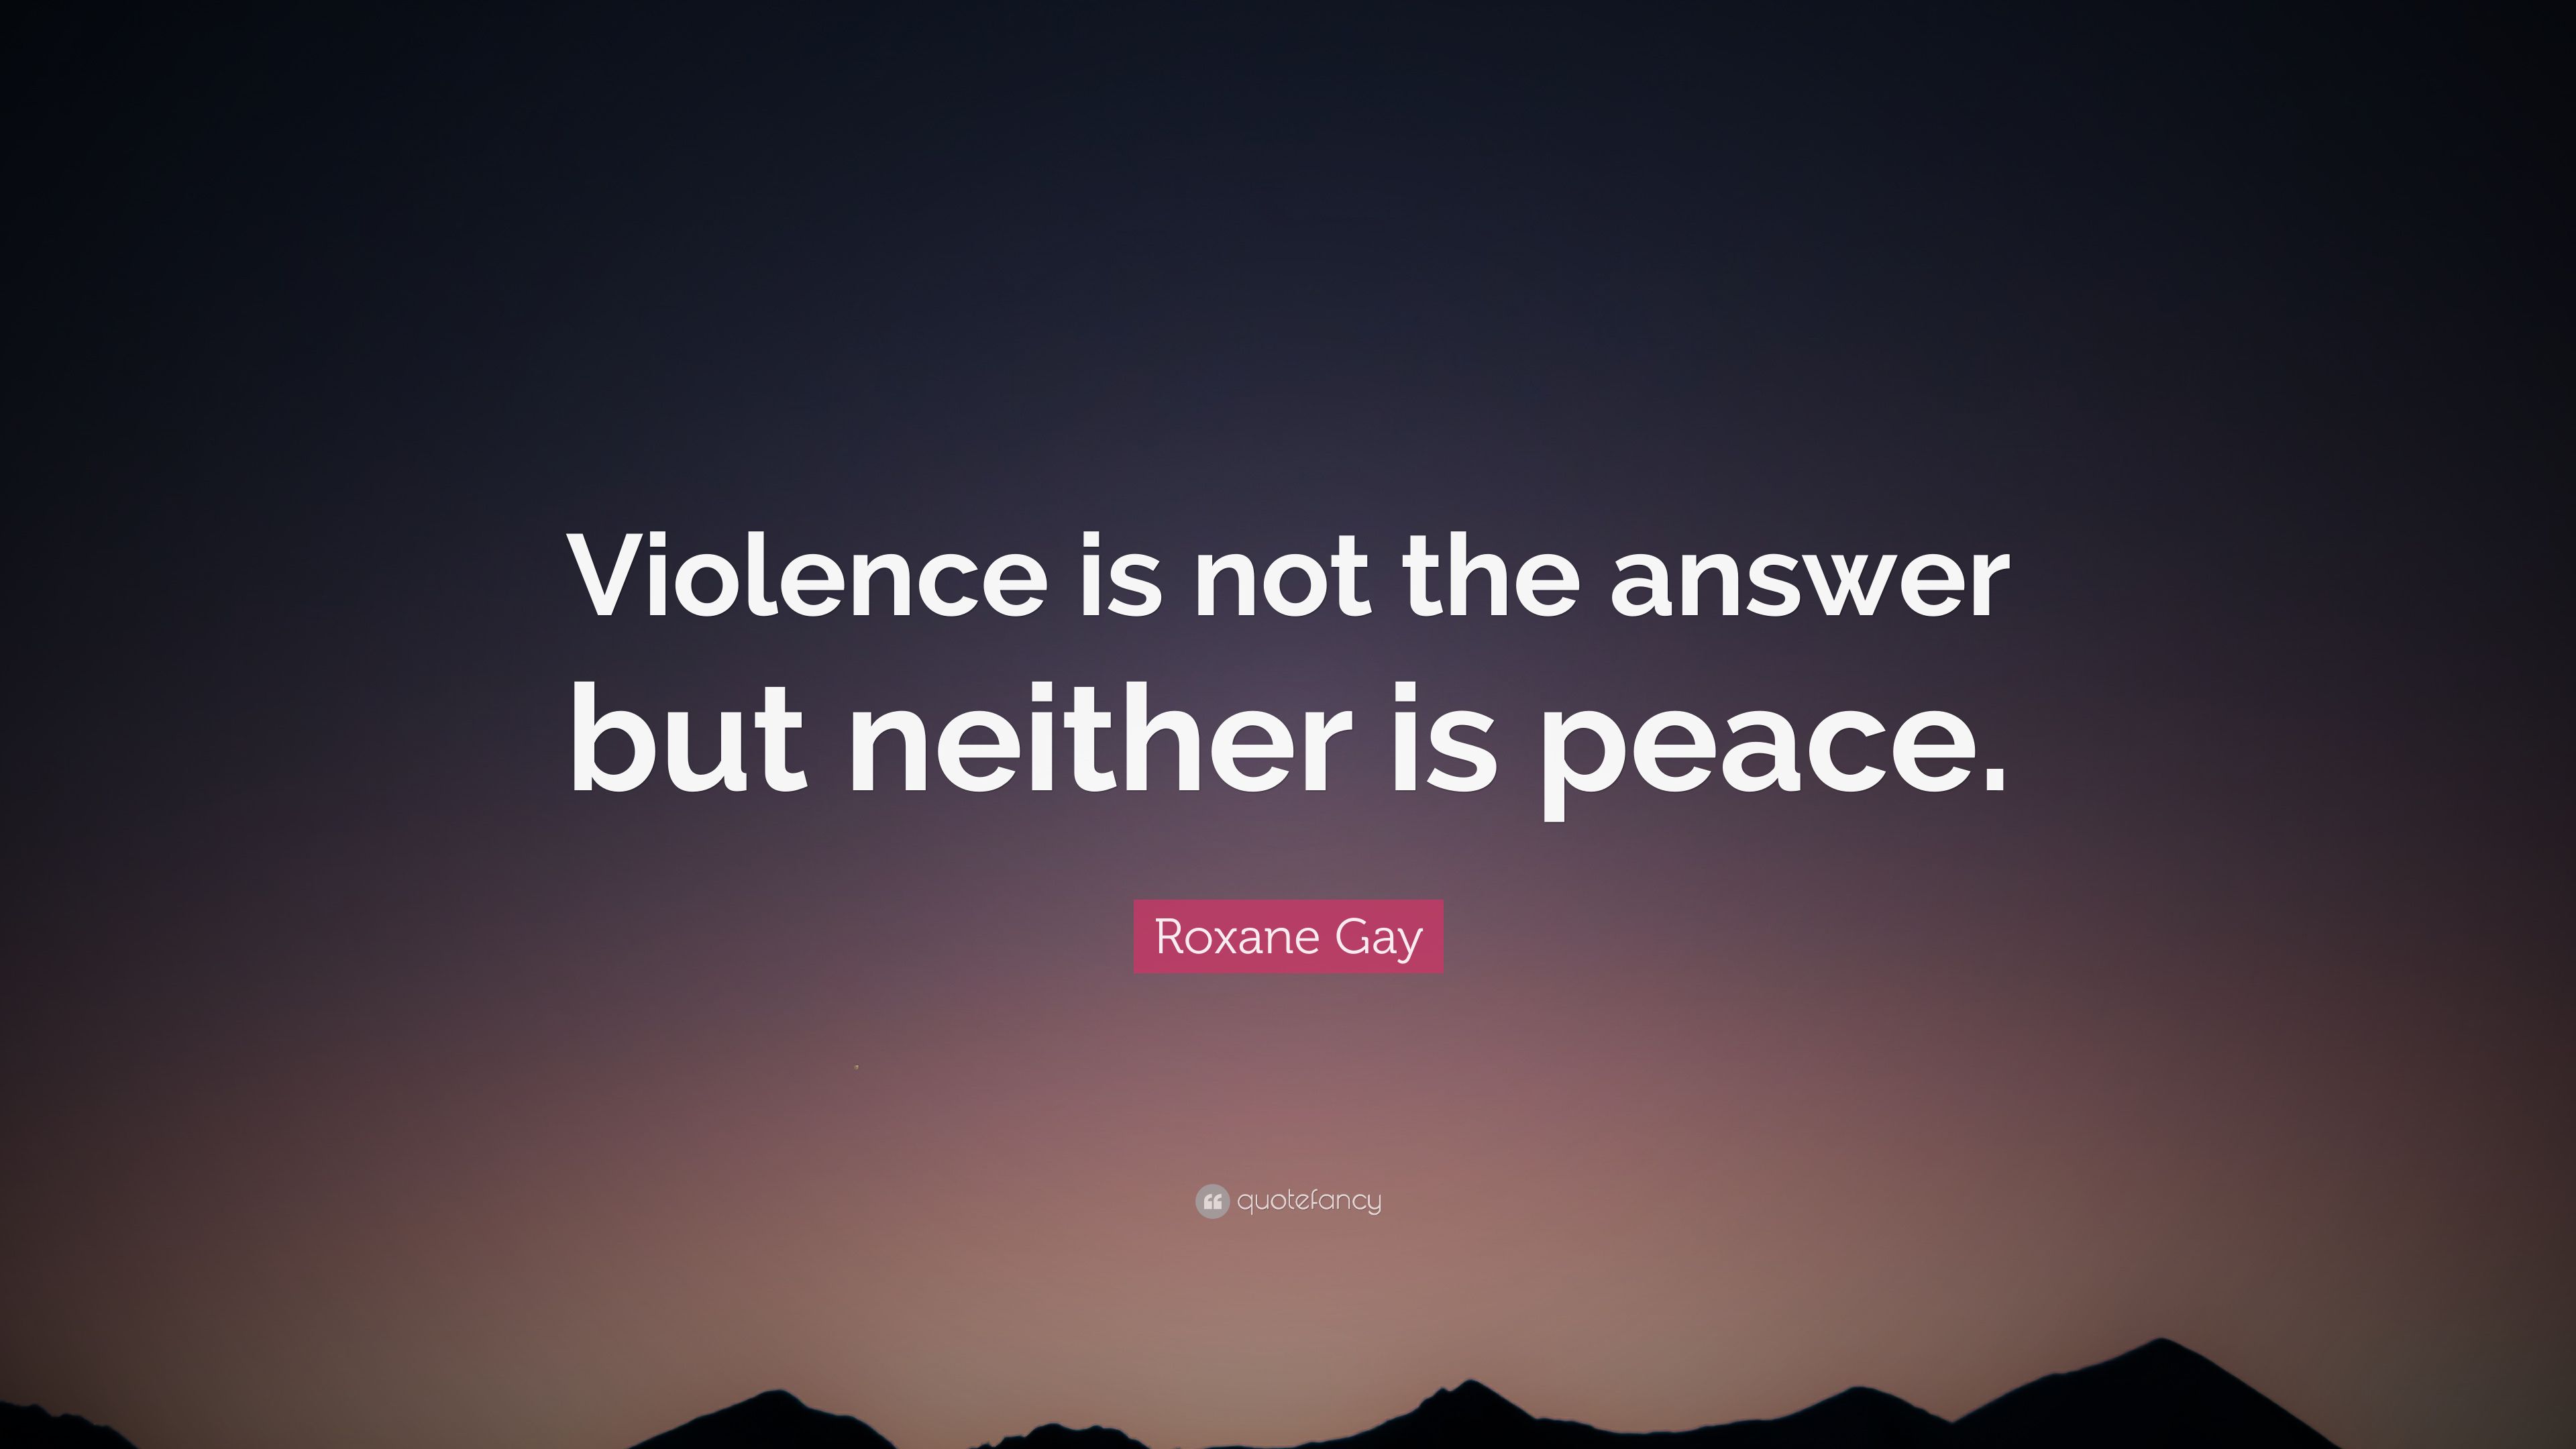 Roxane Gay Quote: “Violence is not the answer but neither is peace